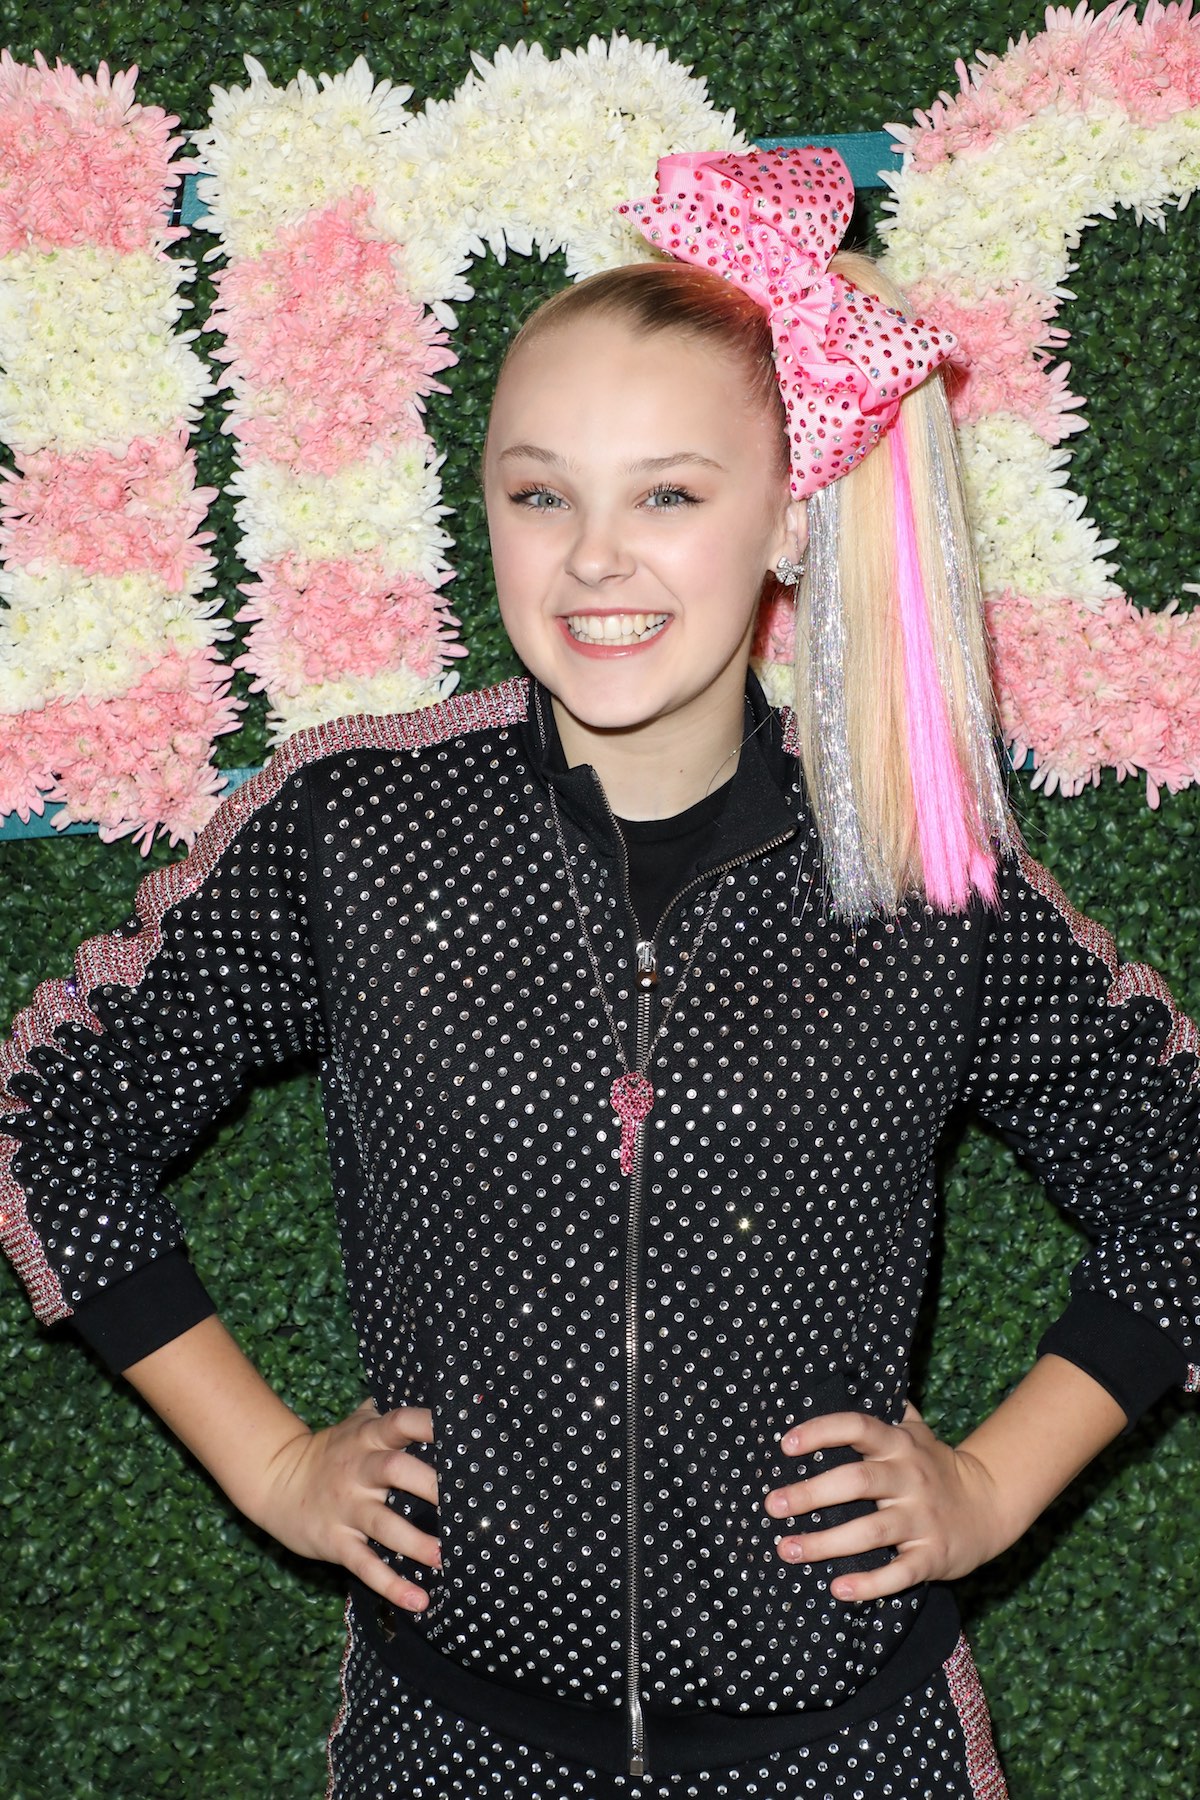 JoJo Siwa's makeup kit recalled by Claire's after FDA finds asbestos